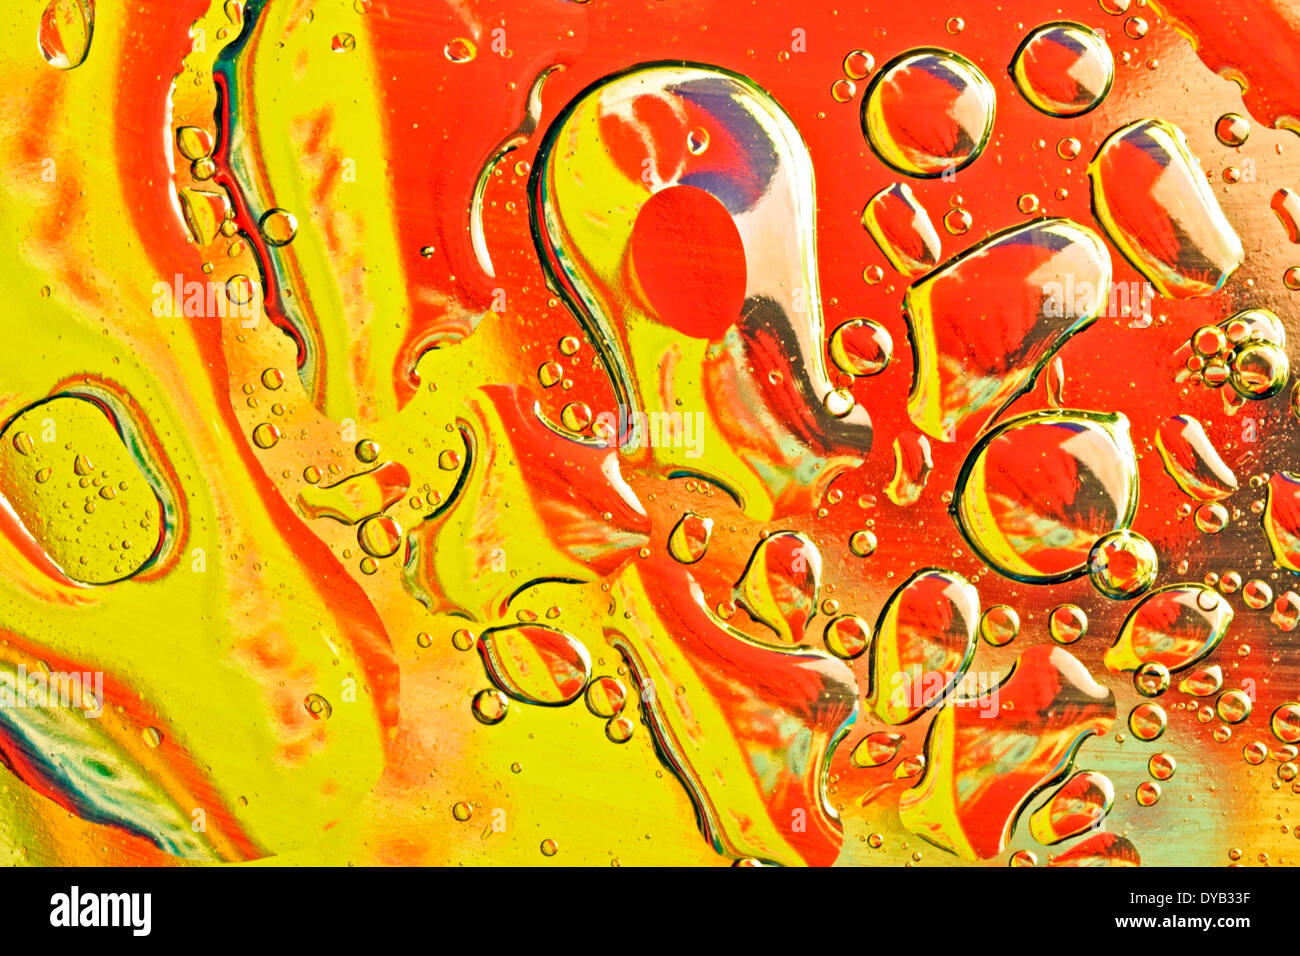 Oil drops on a water surface Stock Photo